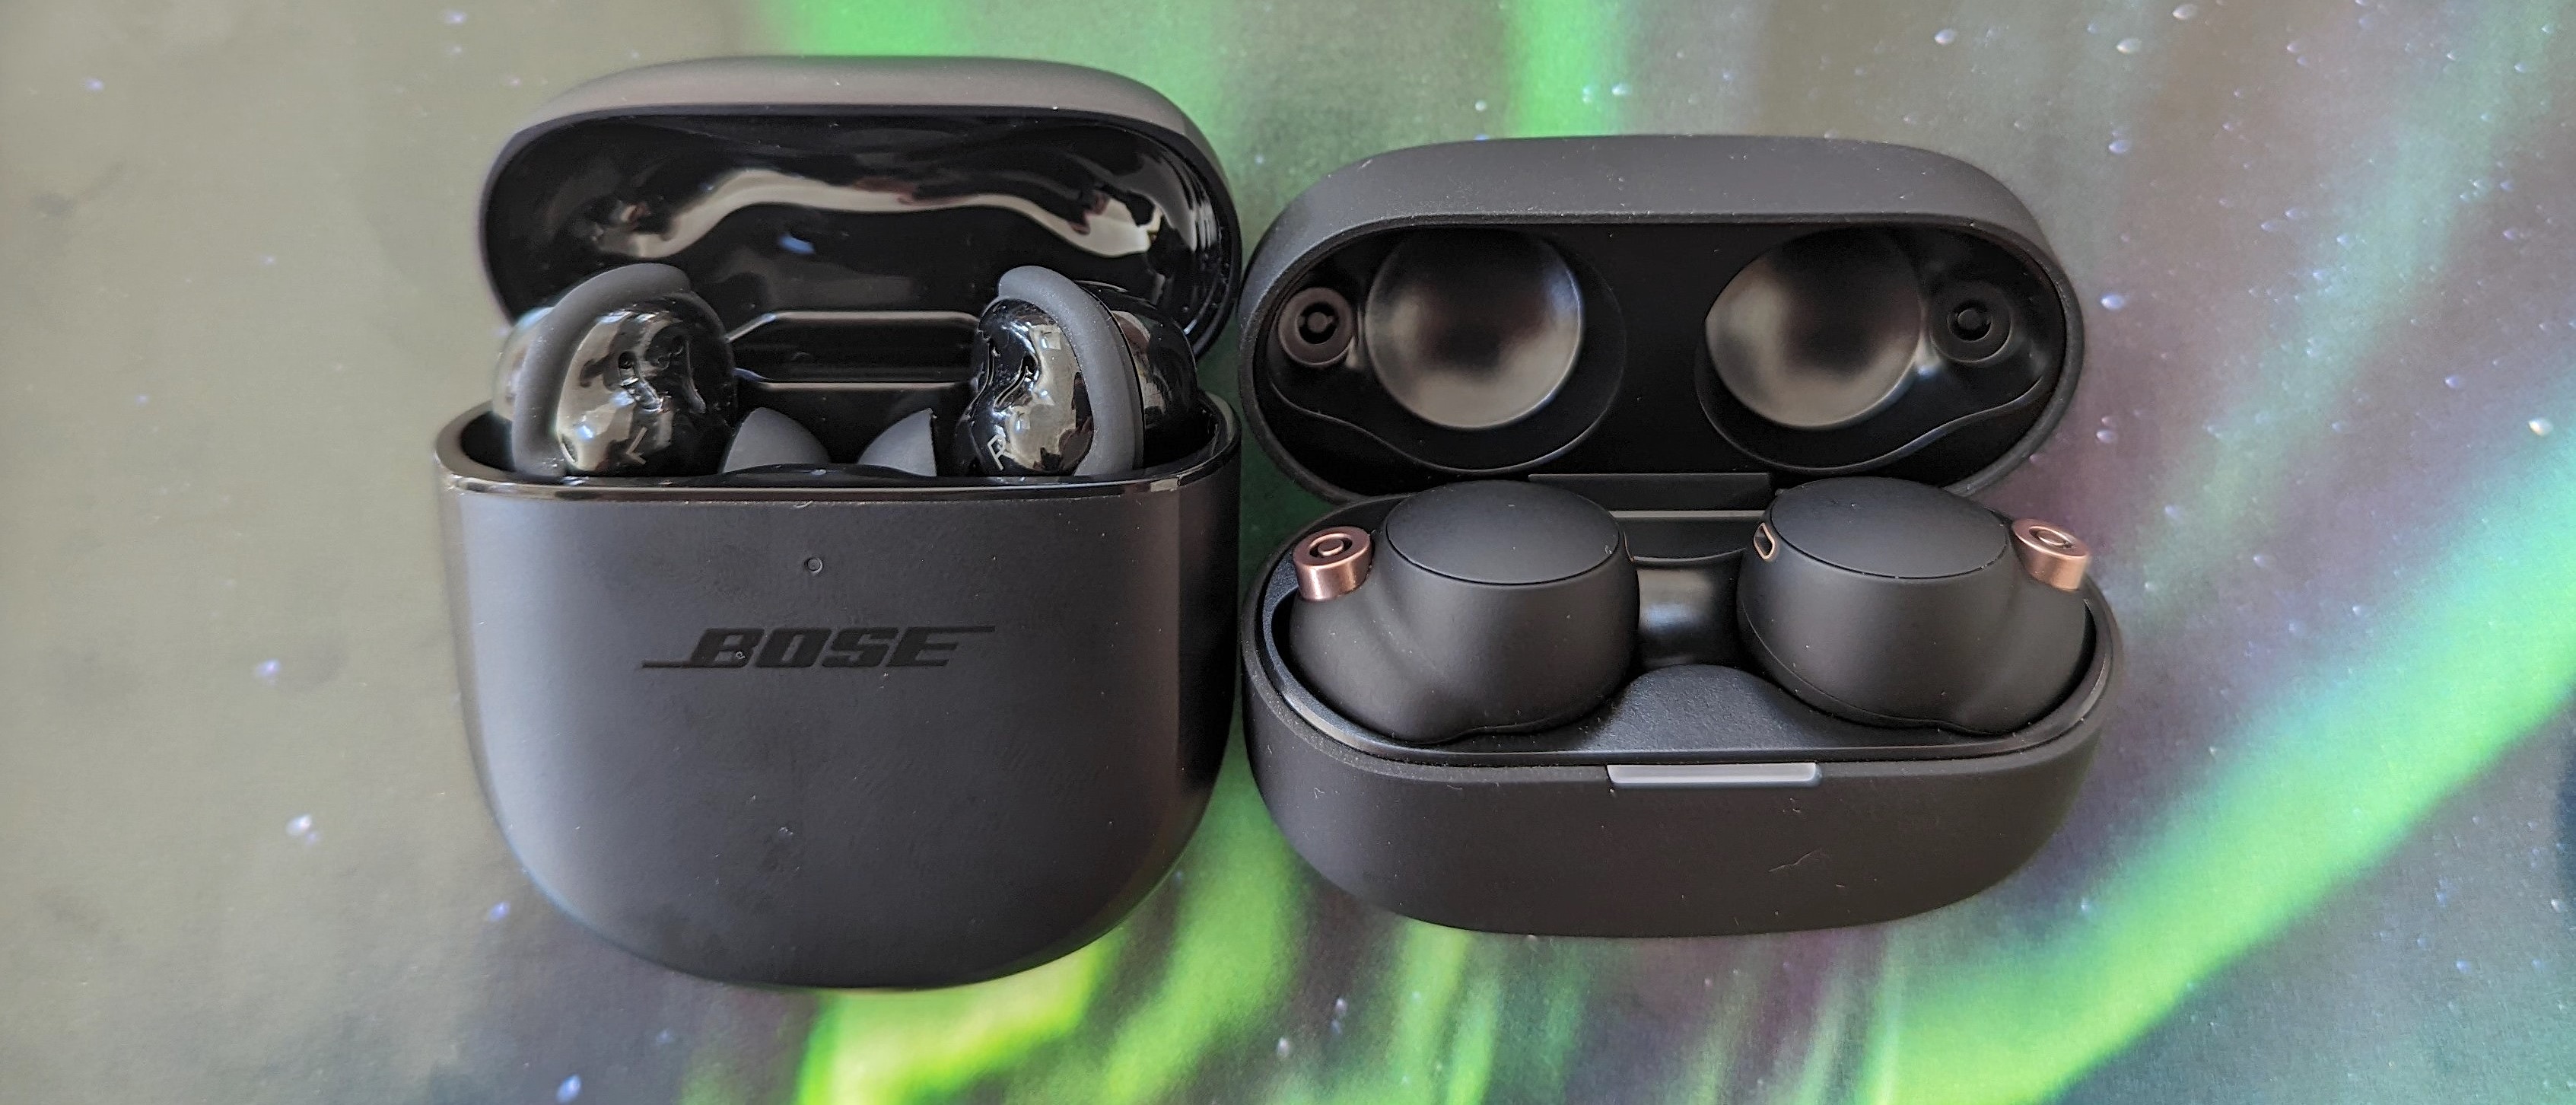 Bose QuietComfort Earbuds vs. Sony Which are the better noise-cancelling earbuds? | Laptop